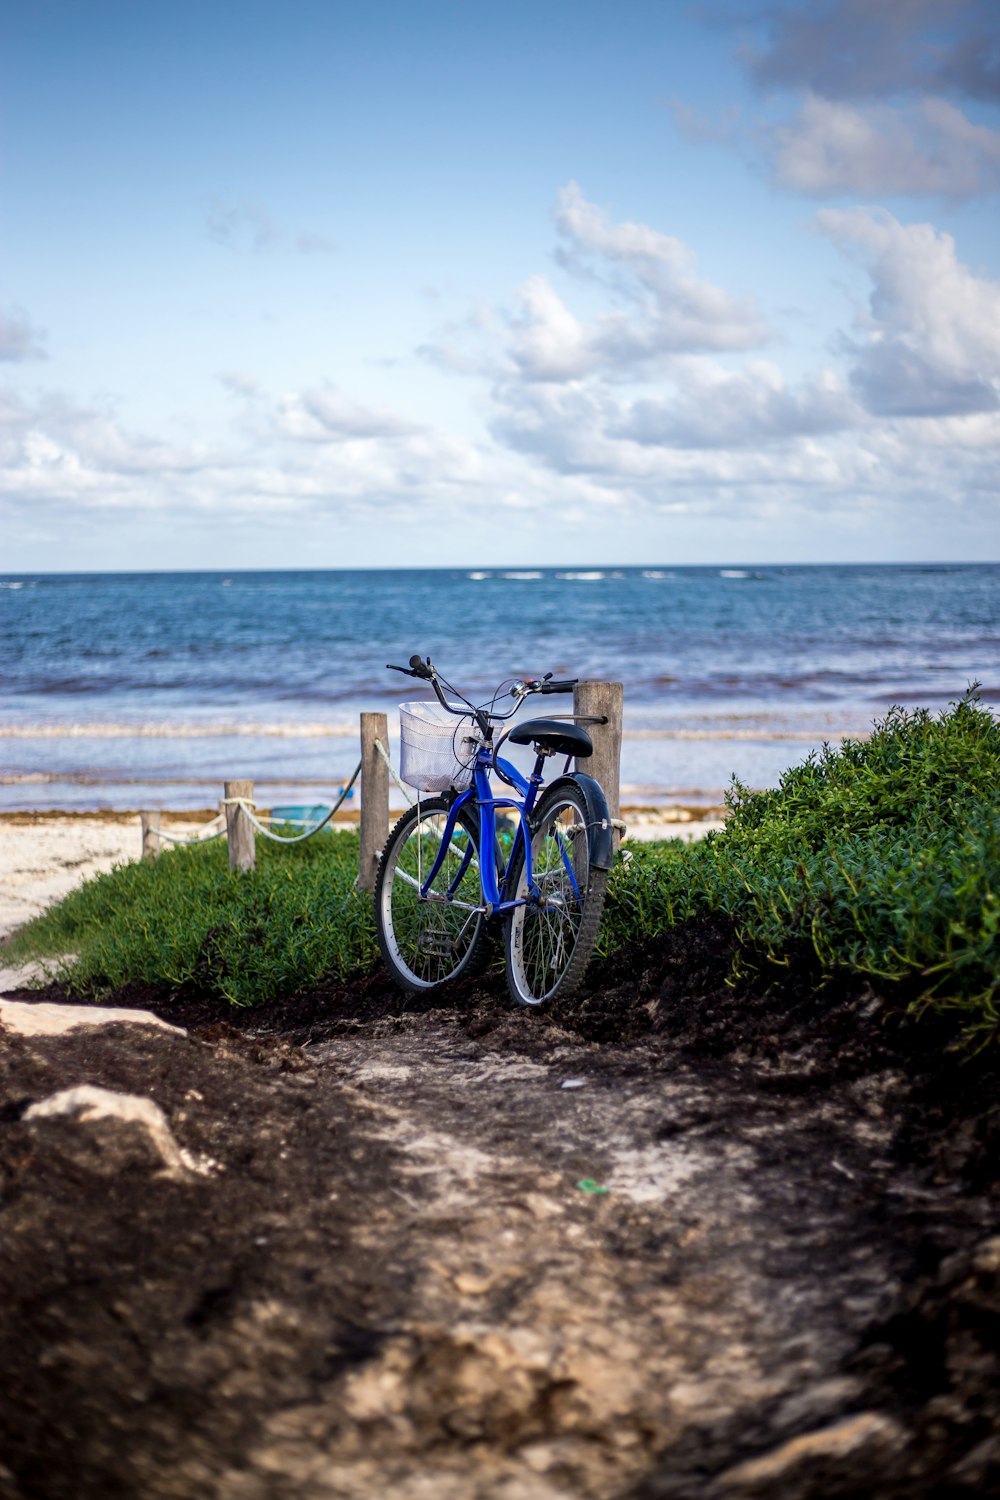 blue bicycle on seashore under cloudy sky